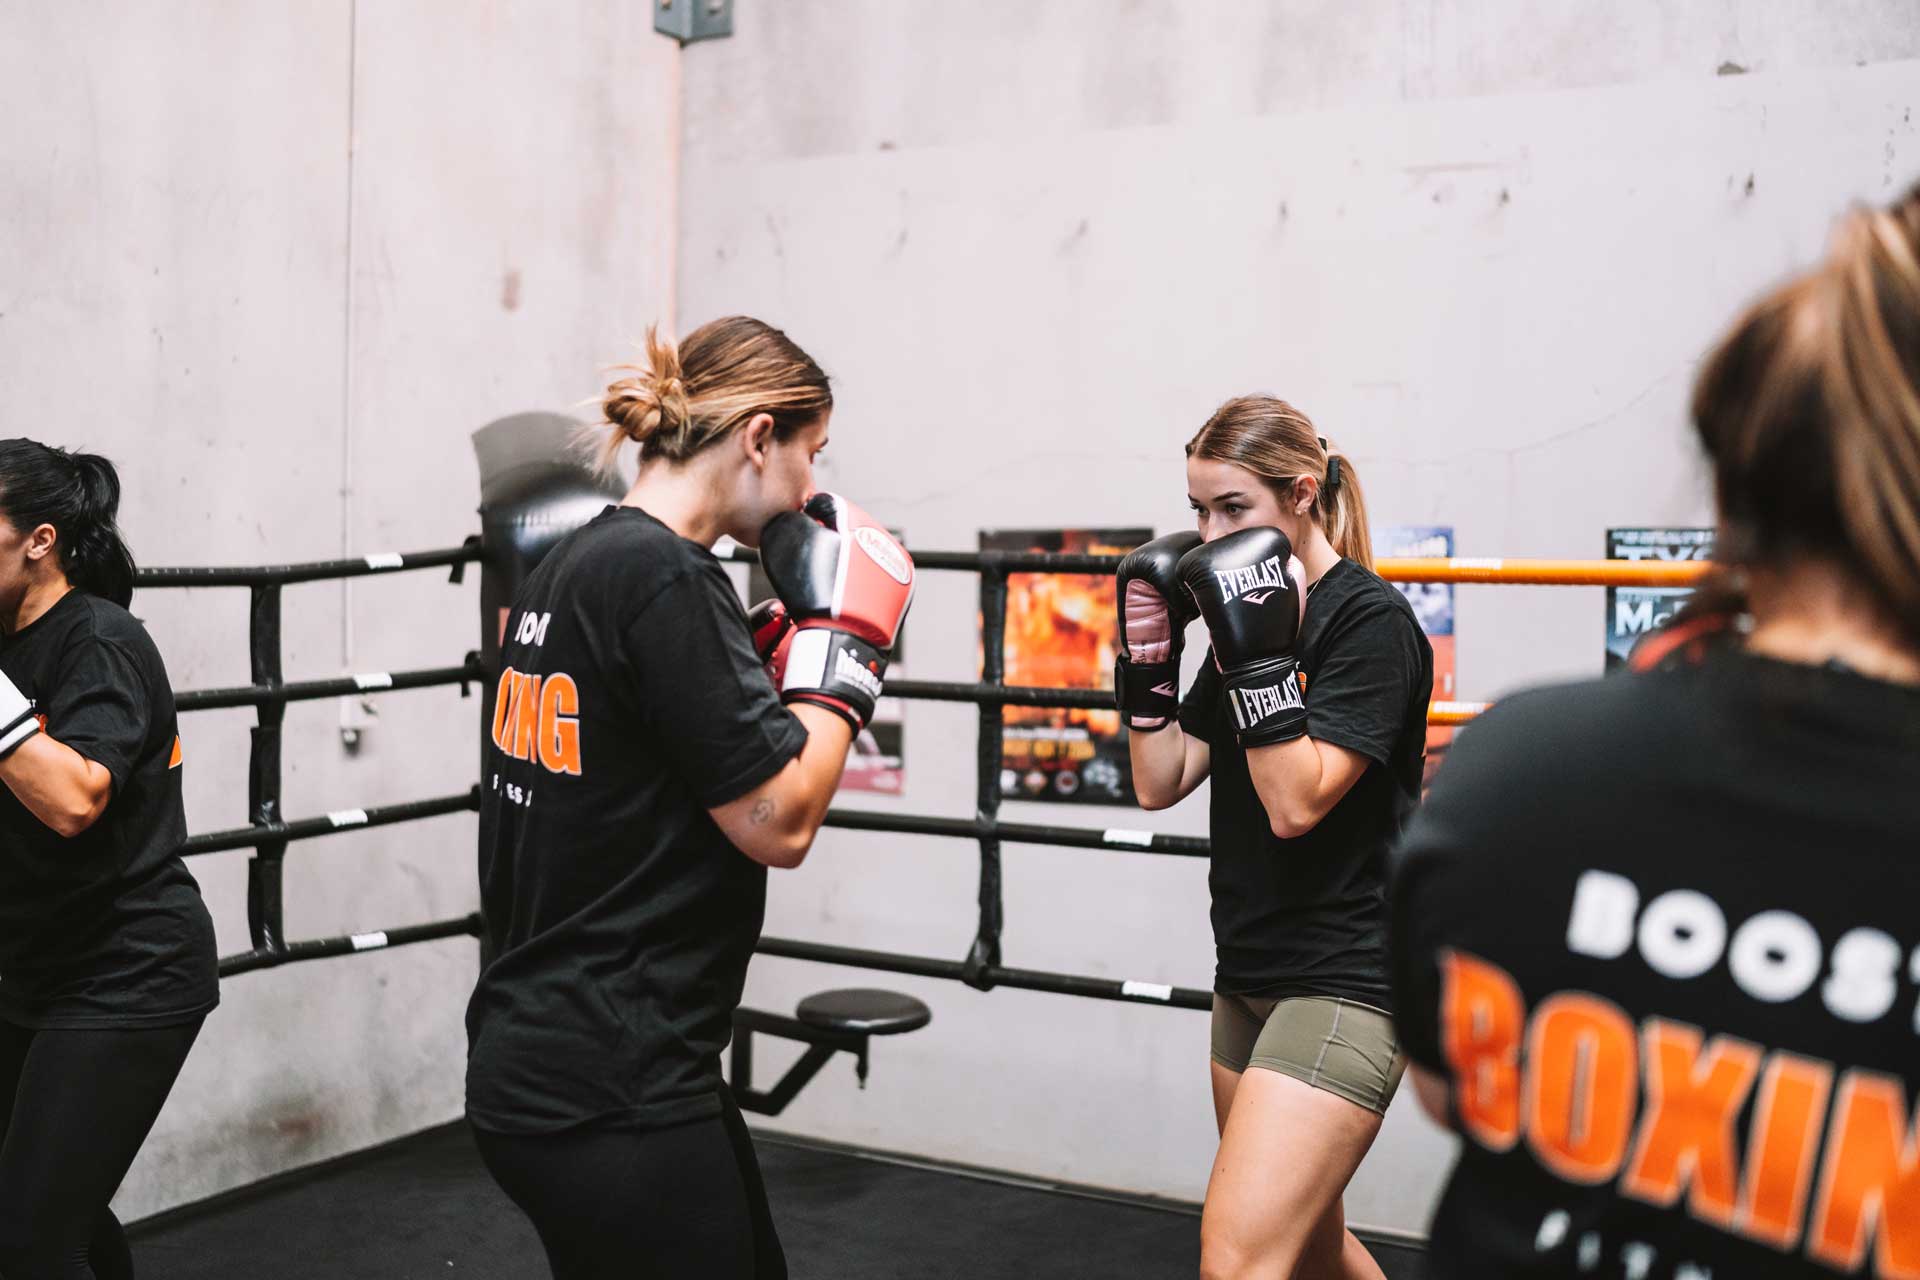 Two females boxing training in ring